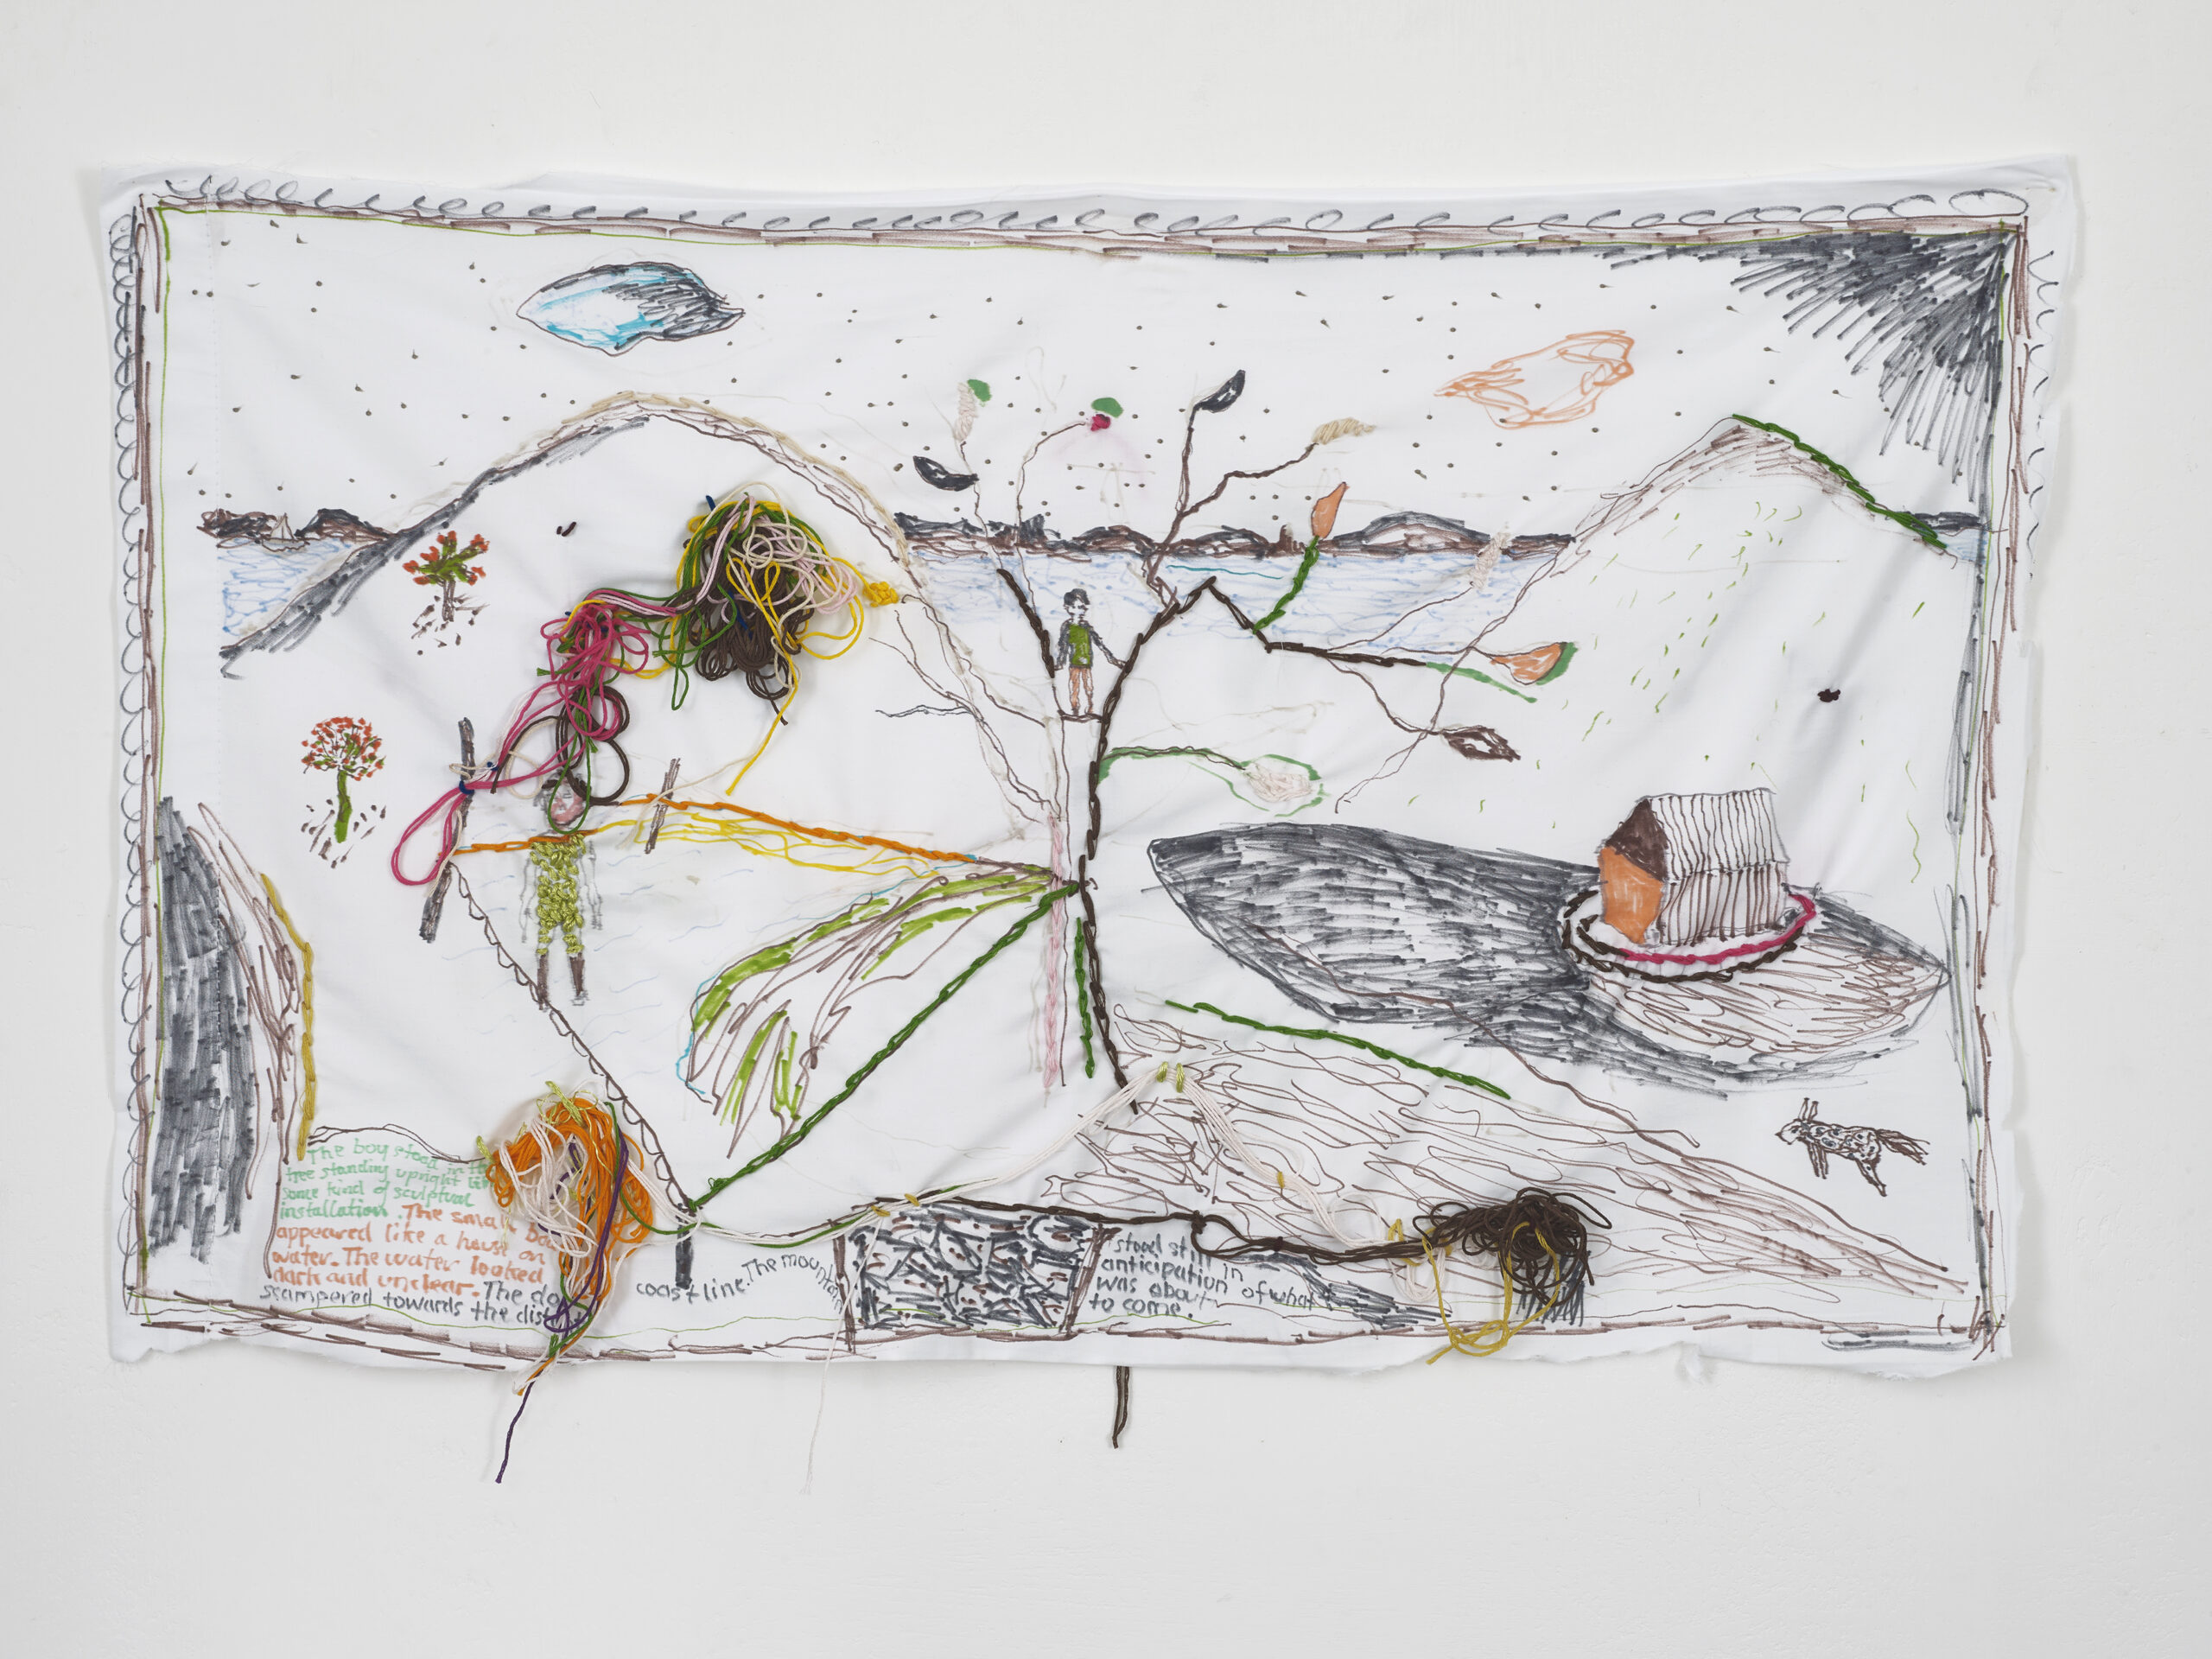 Brian Dawn Chalkley Anticipation of what was about to come (2020) Pencil, felt tip and thread on cotton pillow case, 75 cm x 45 cm.